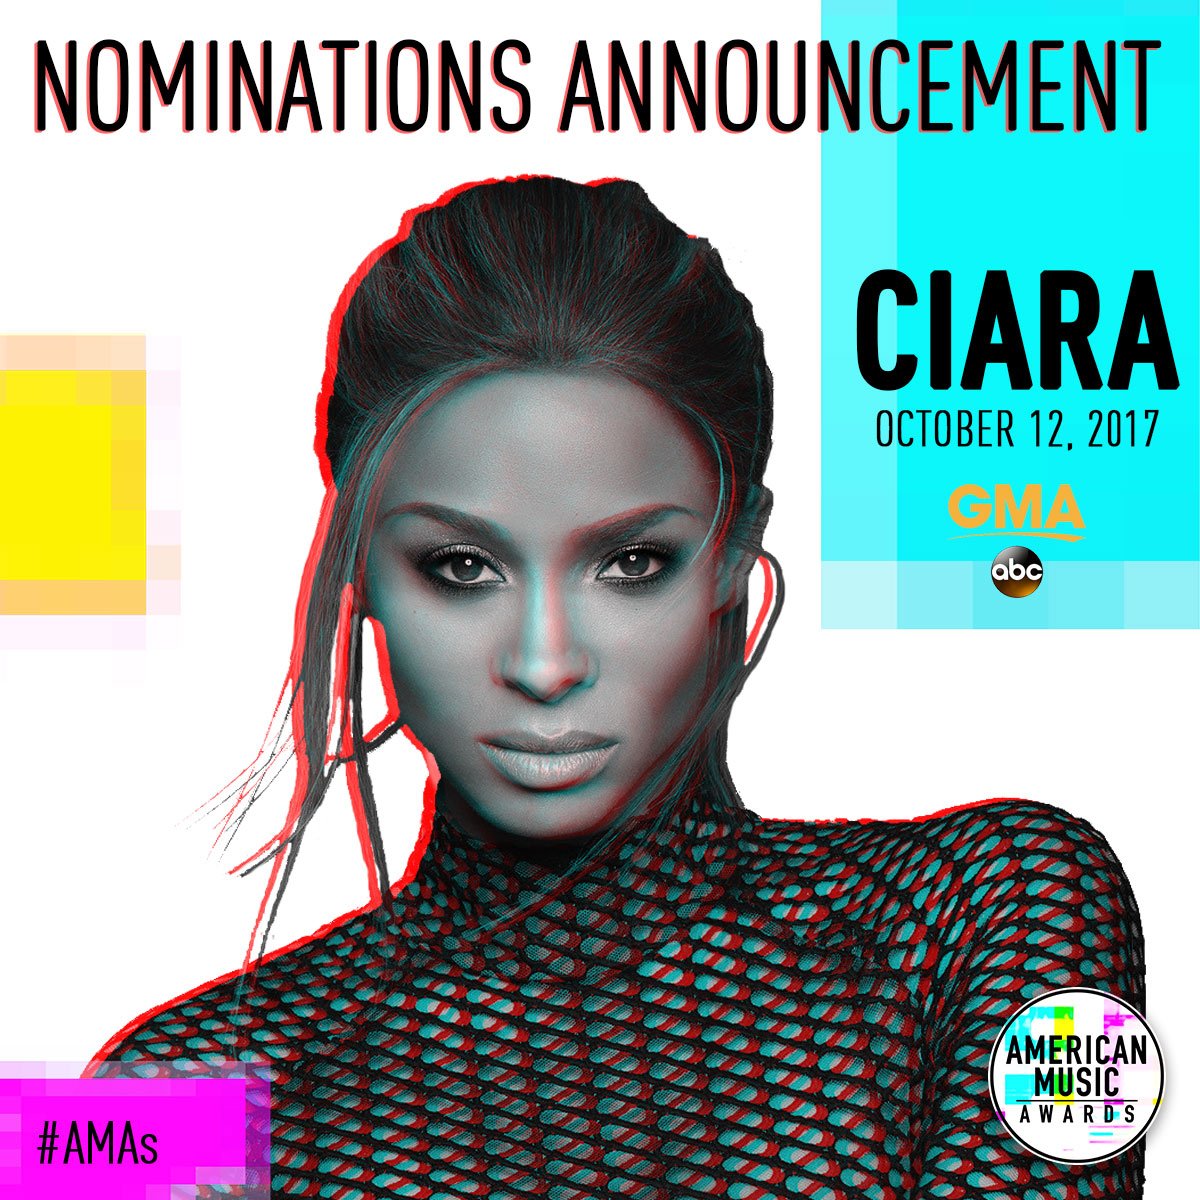 RT @GMA: TOMORROW: @ciara brings us the @AMAs nominations LIVE in Times Square, only on @GMA! https://t.co/i5f8nVK3yF